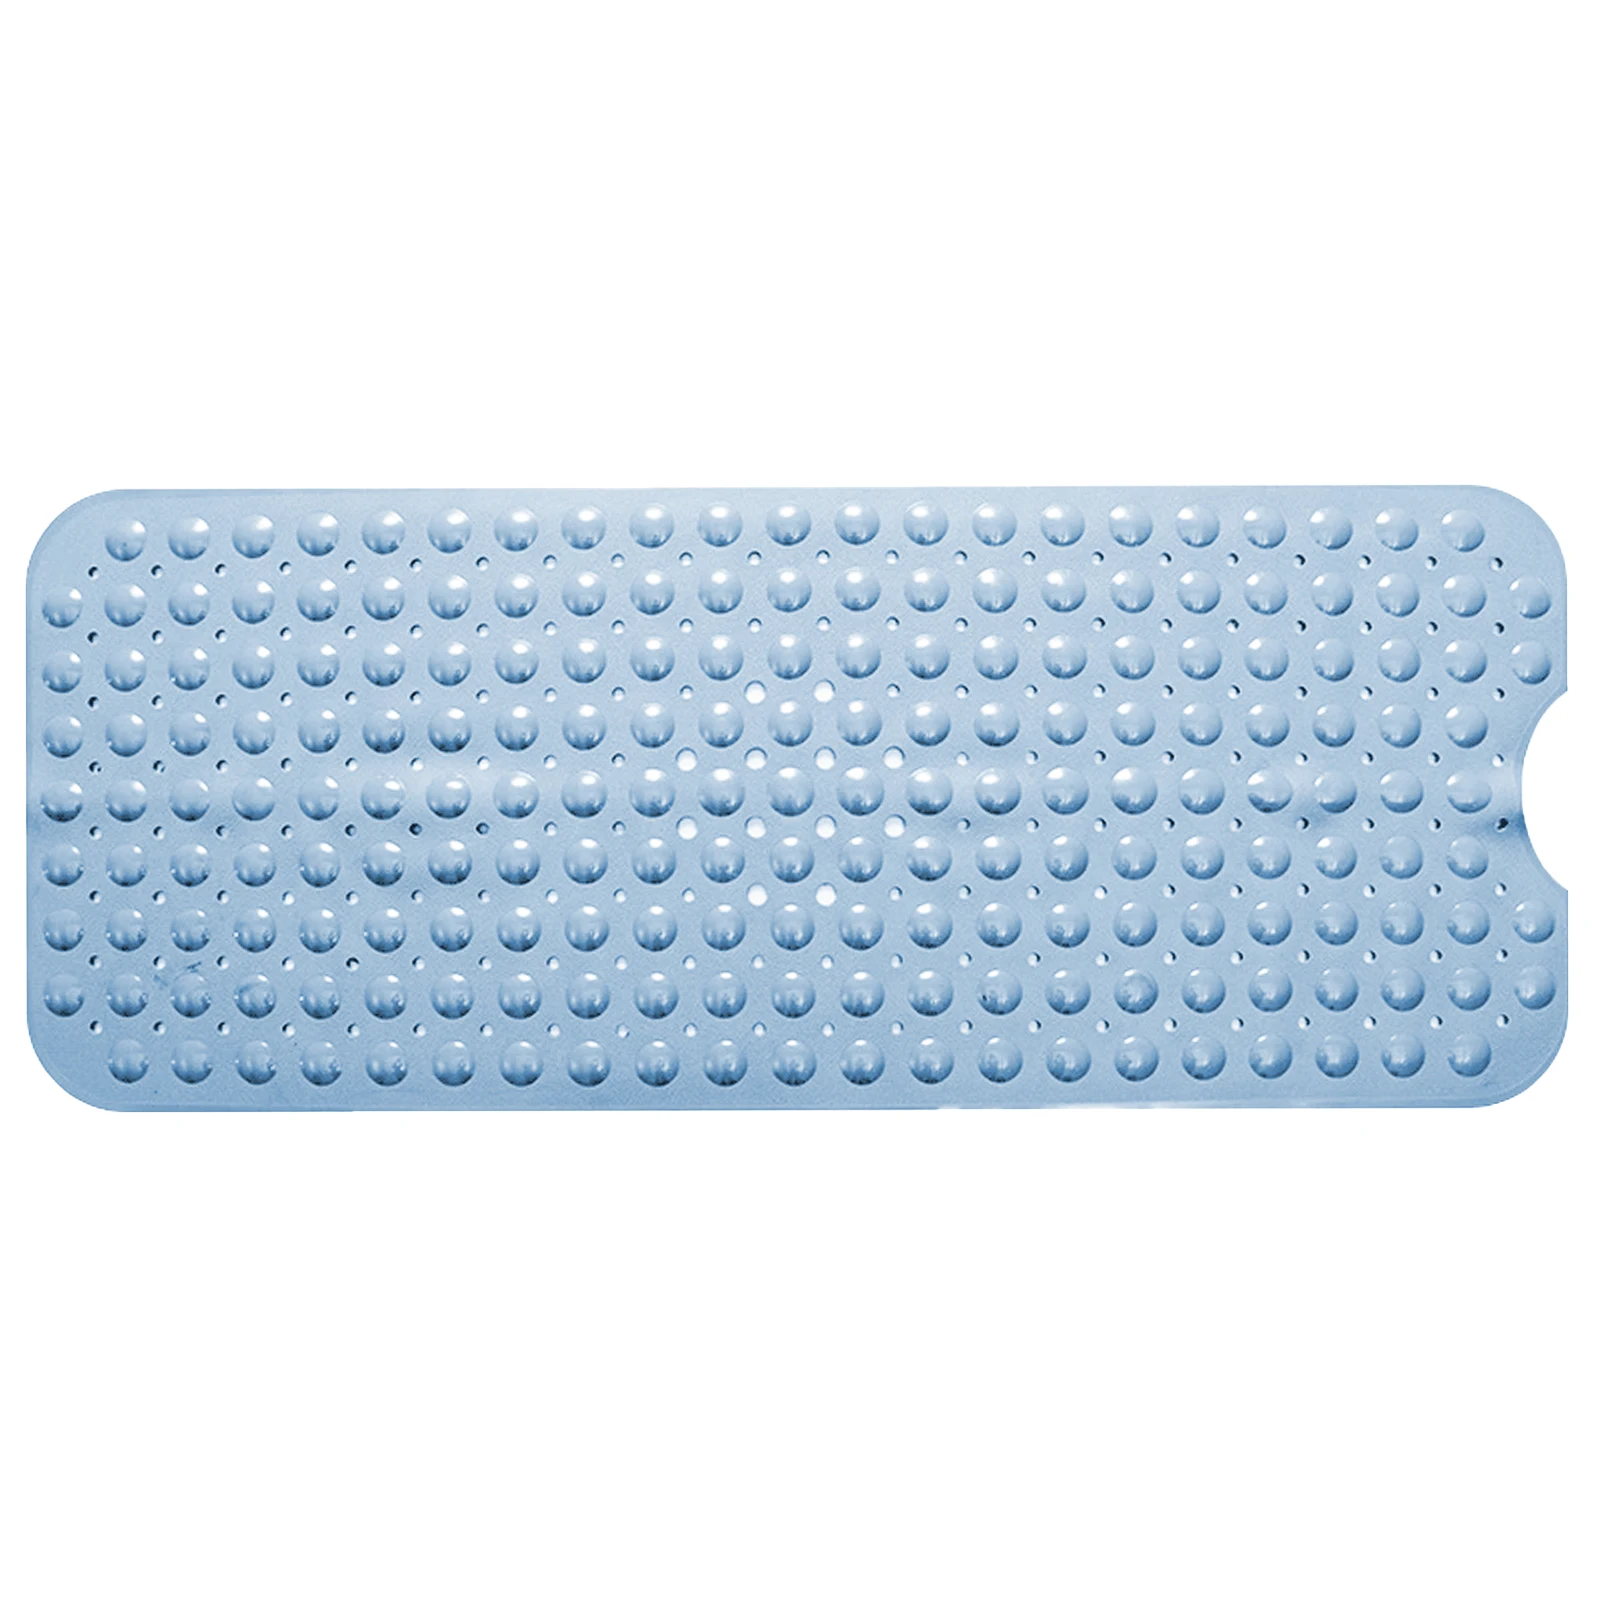 

Shower Mat With Suction Cup 100x40cm Solid Drain Holes Bathtub Pad Extra Long Machine Washable Bathroom Non Slip PVC Easy Clean